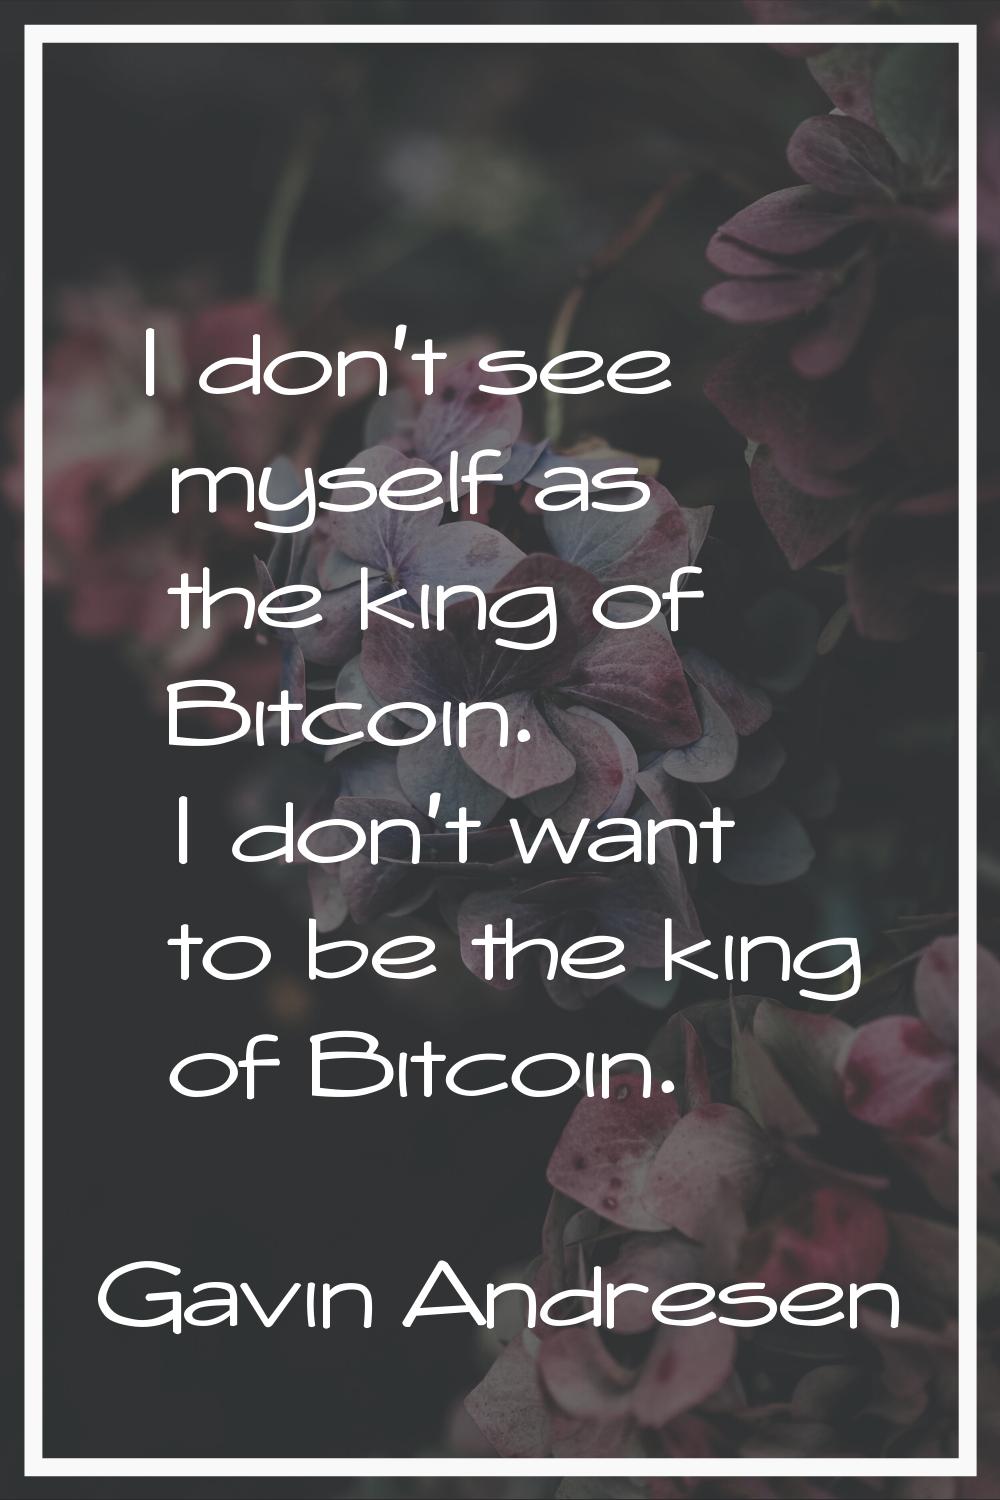 I don't see myself as the king of Bitcoin. I don't want to be the king of Bitcoin.